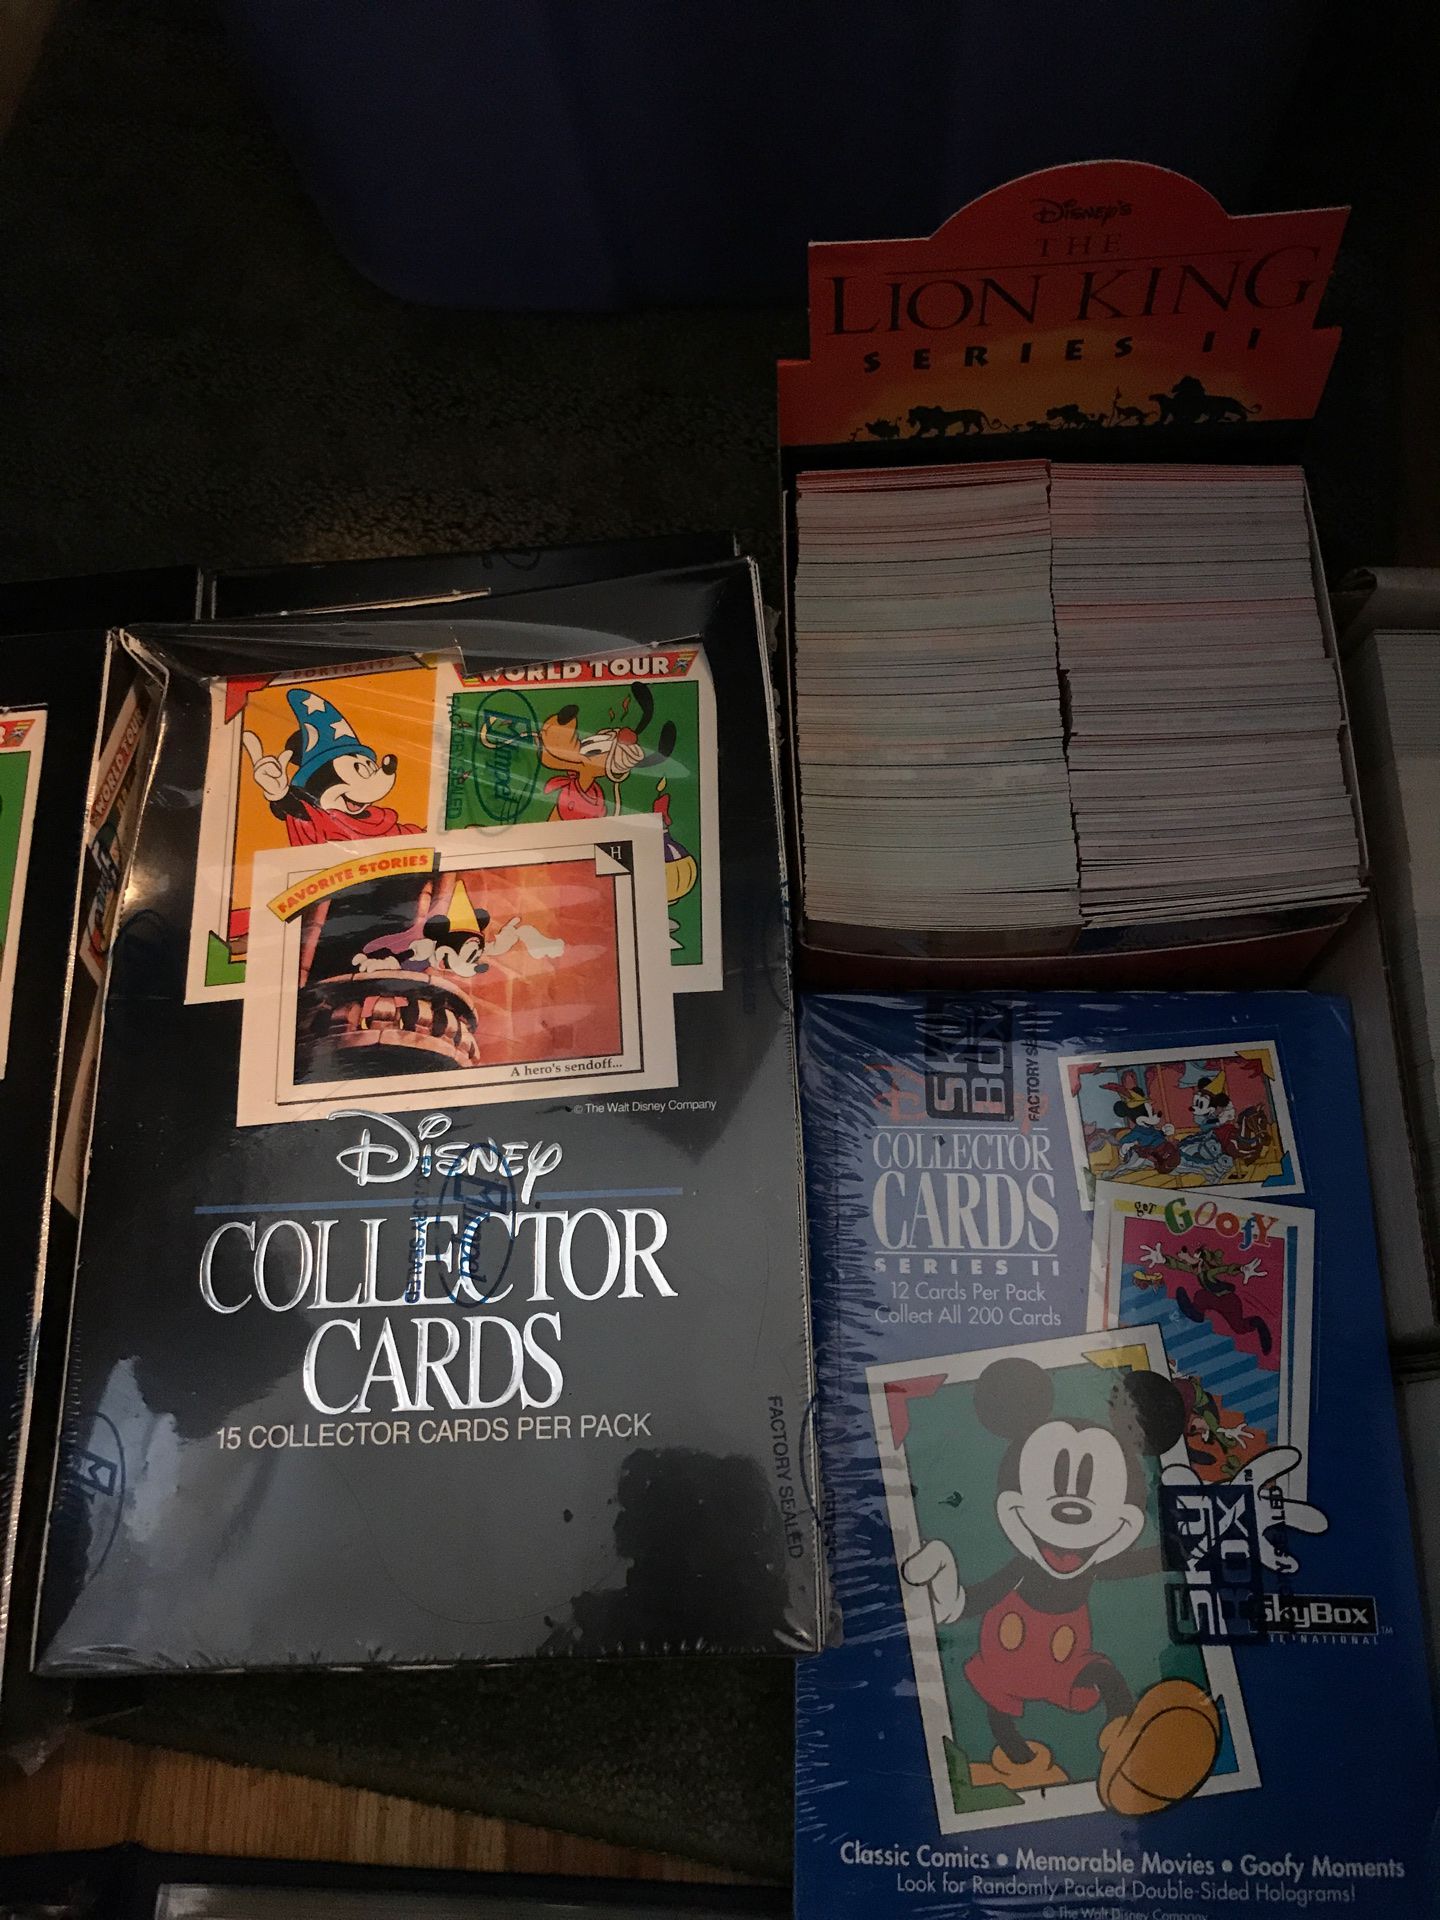 Disney Collector Cards 5 unopened boxes, ~4 opened boxes—all for $75